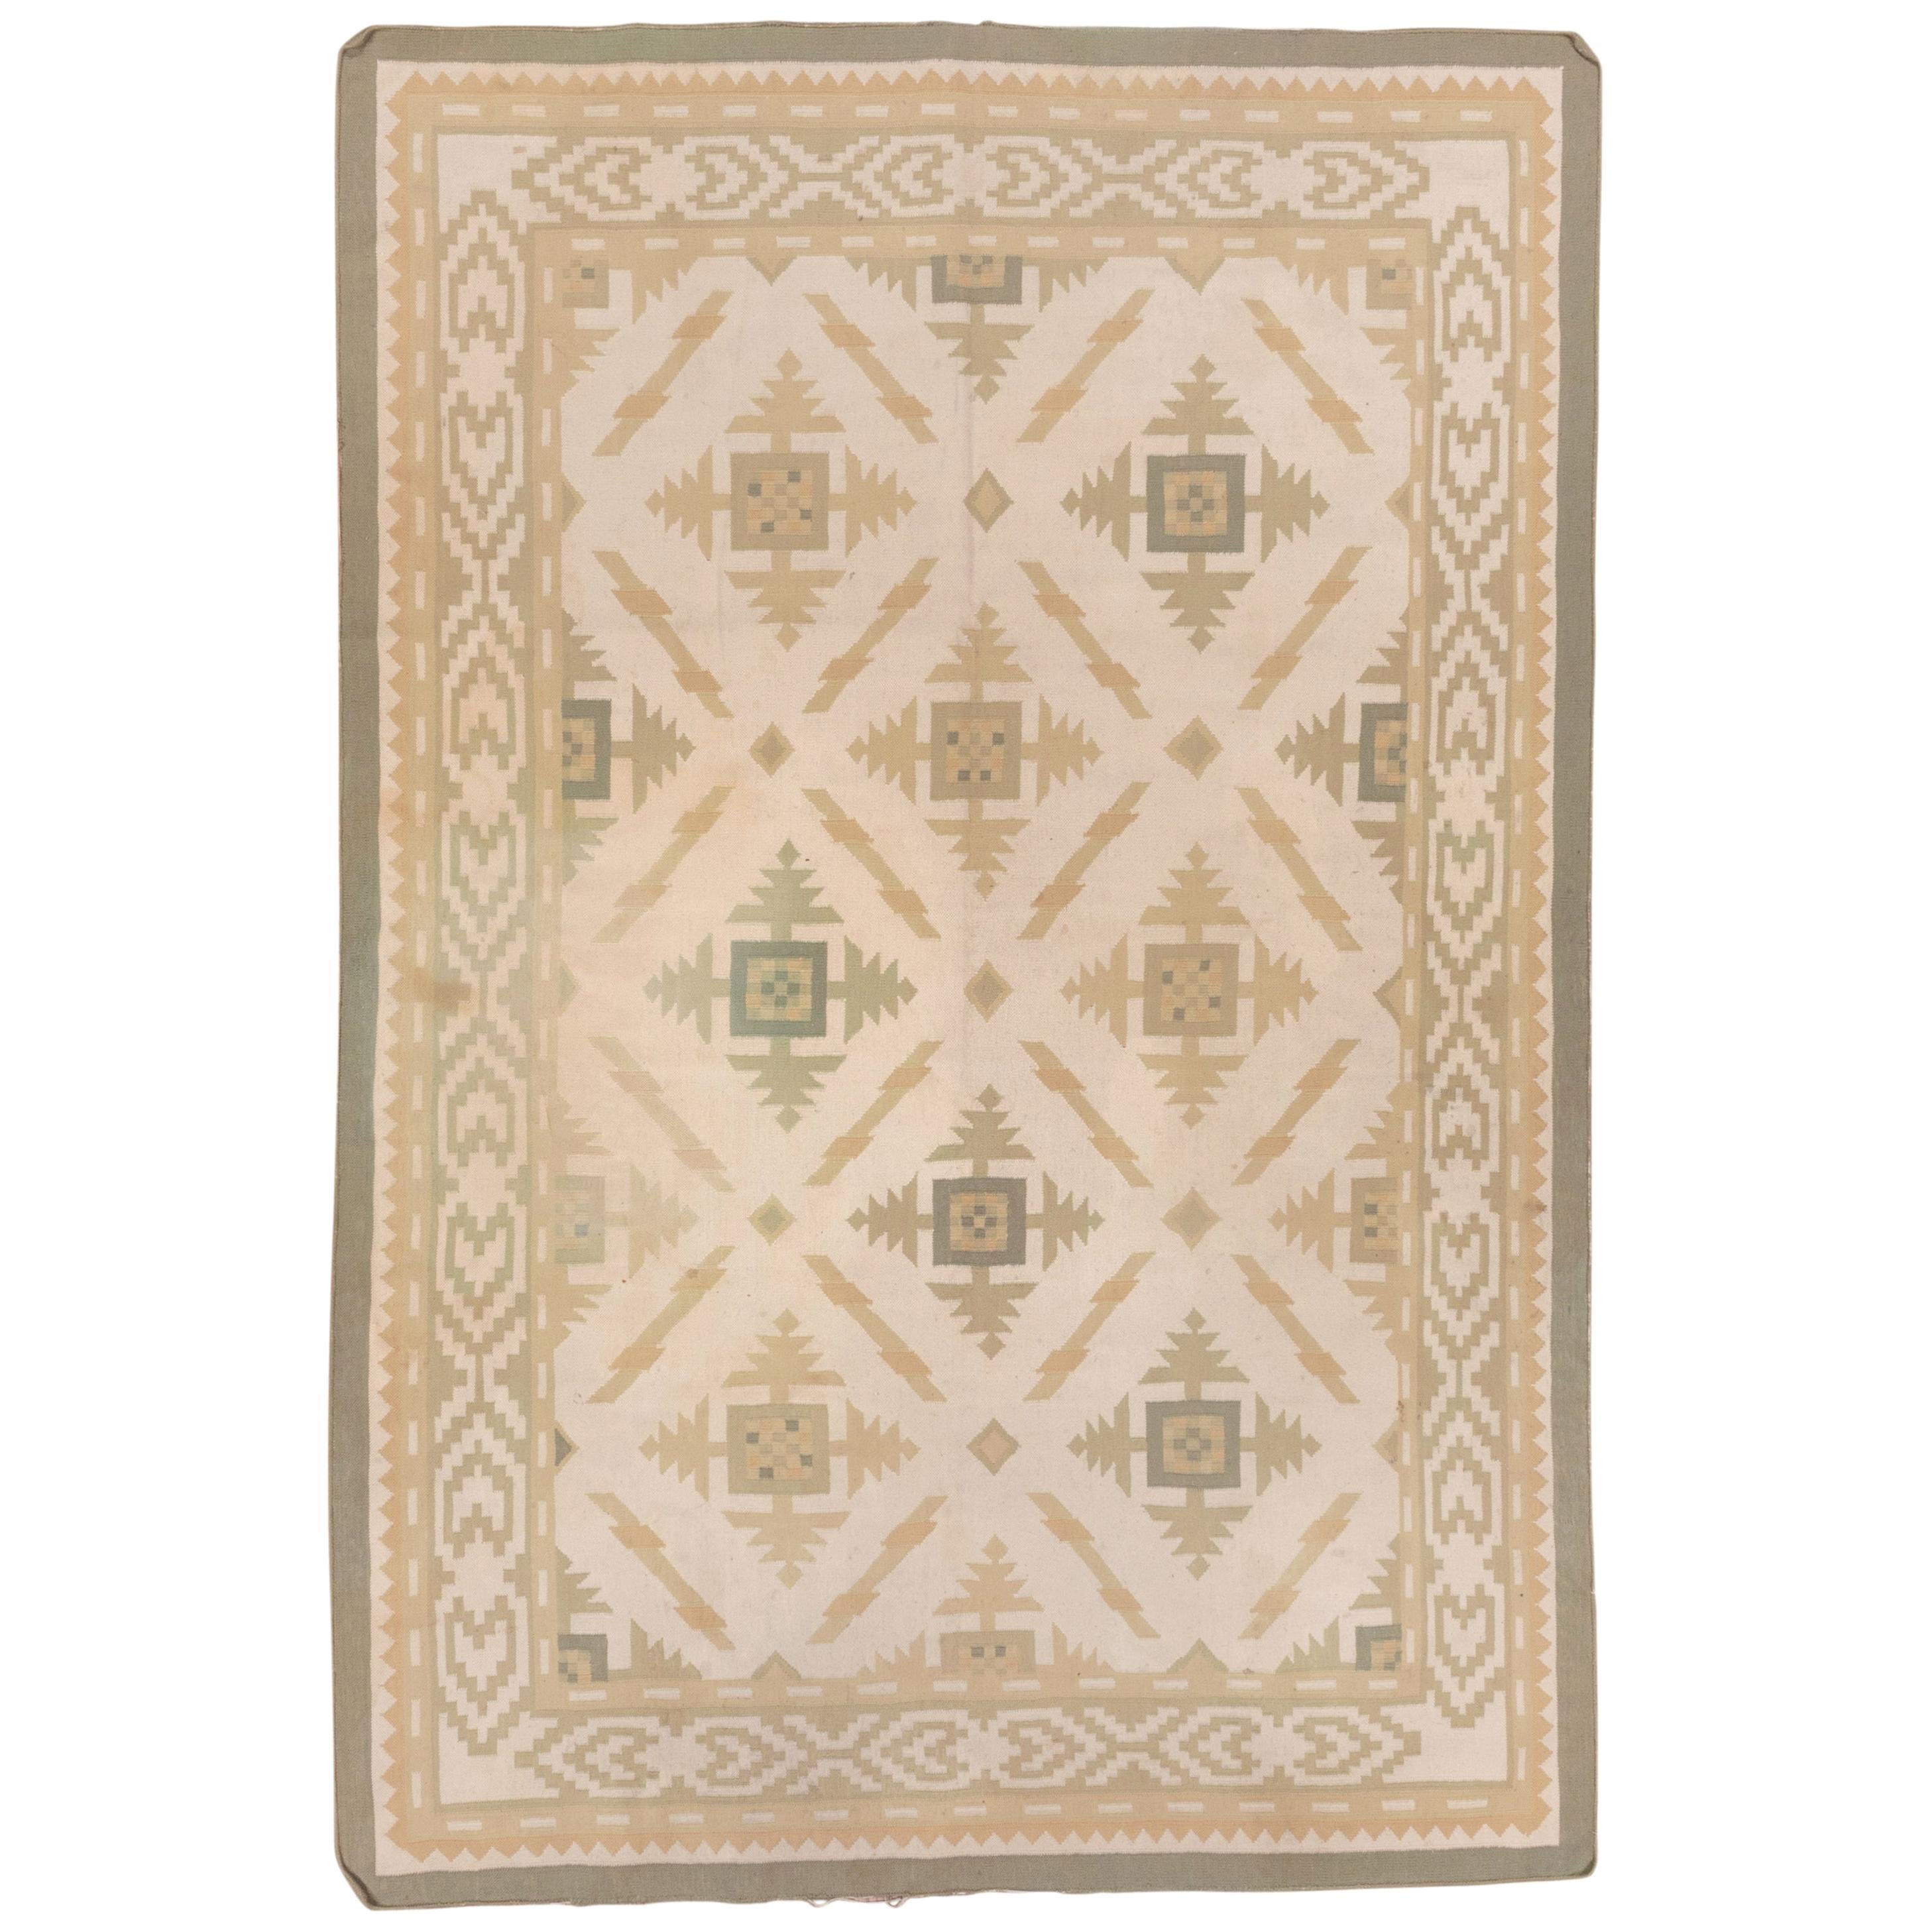 Antique Indian Cotton Dhurrie Rug, Allover Field, Green Accents